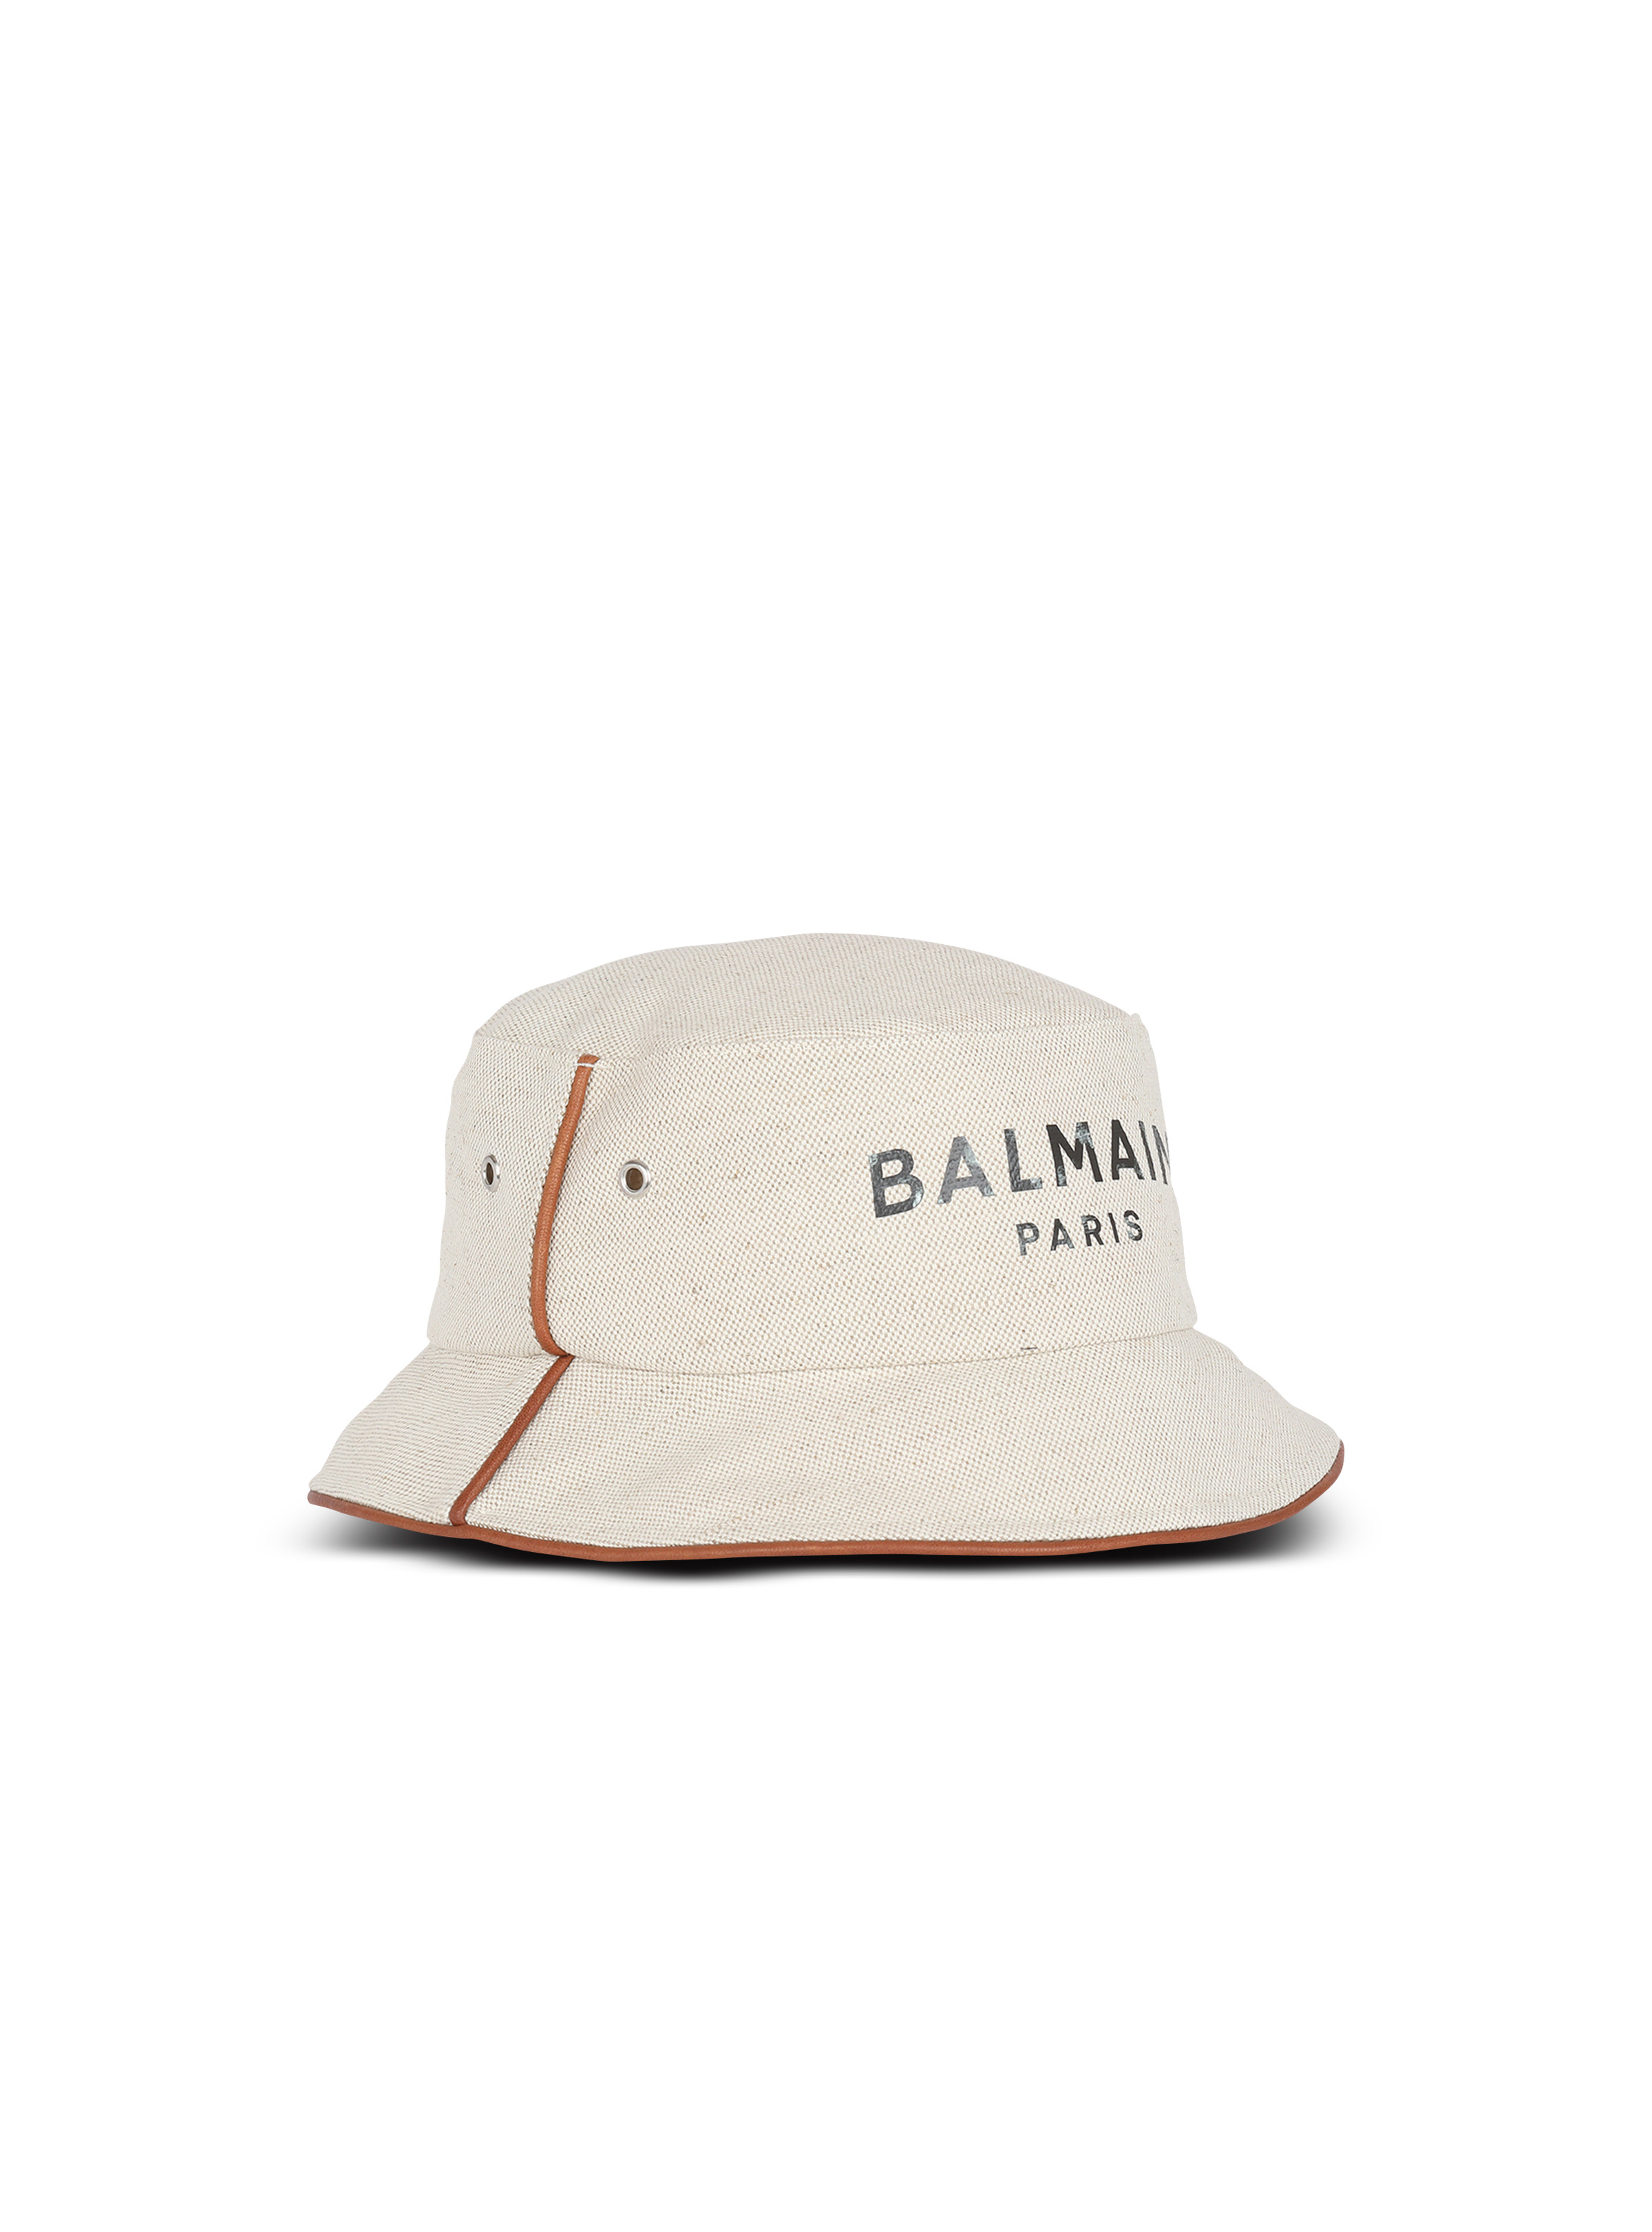 Cotton and leather B-Army bucket hat with Balmain logo - 4